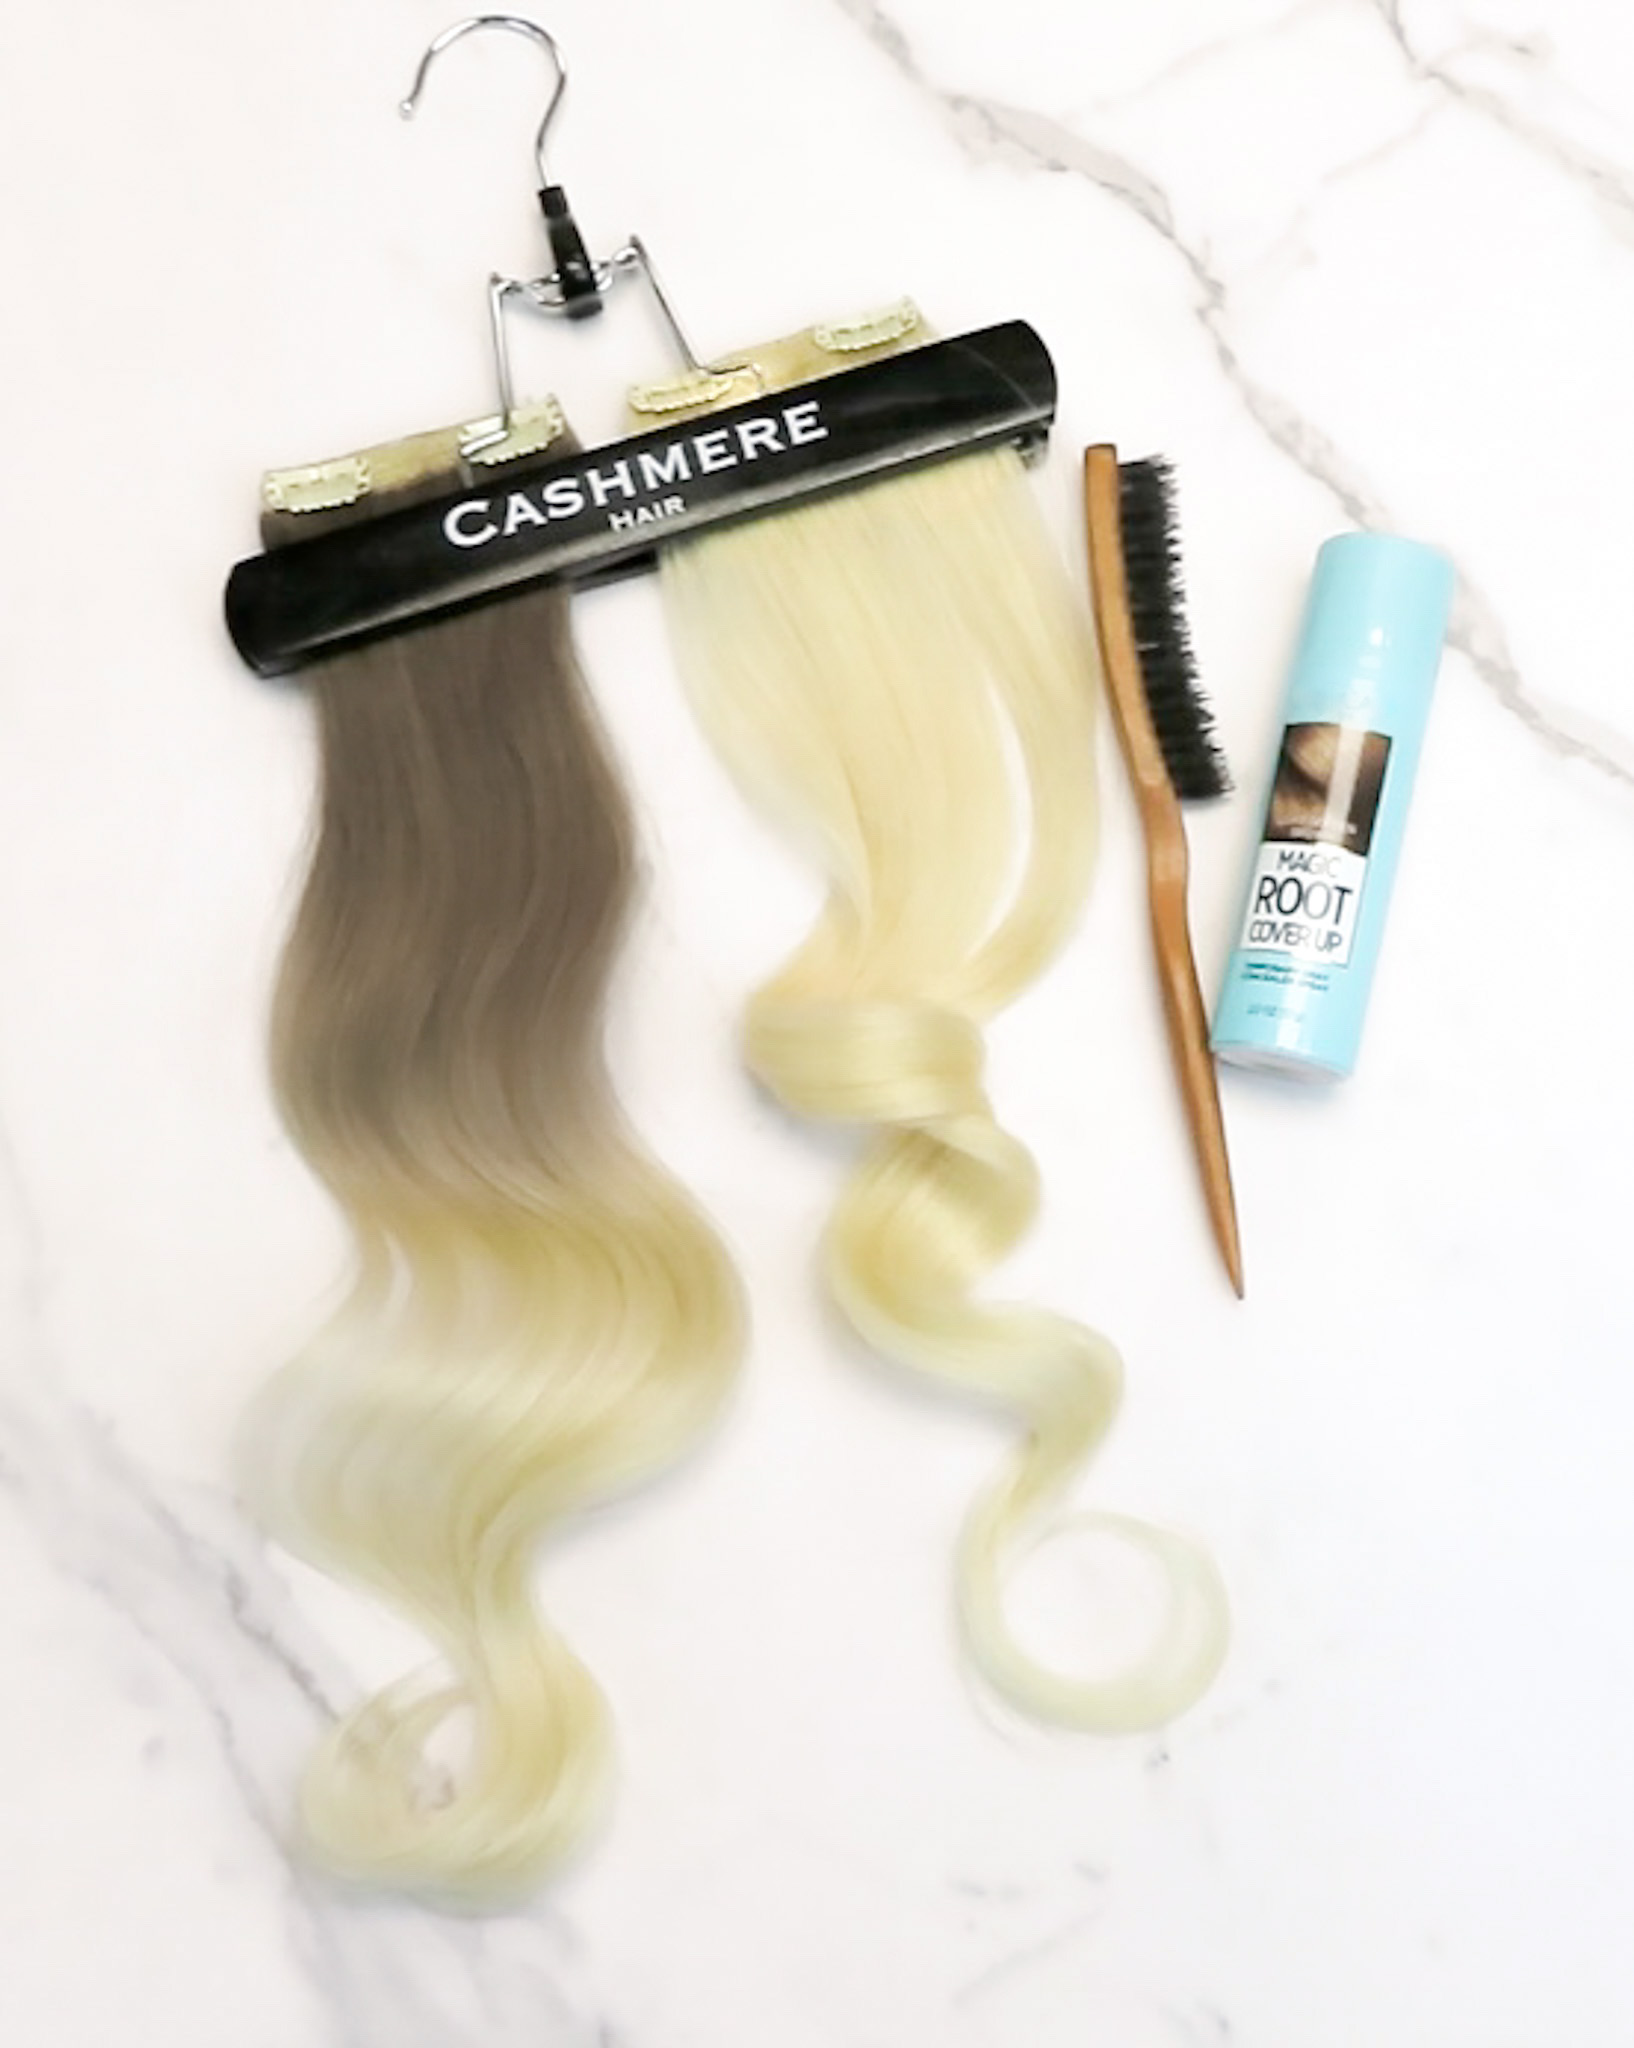 Cashmere Hair extensions side by side with root touch up spray and brush